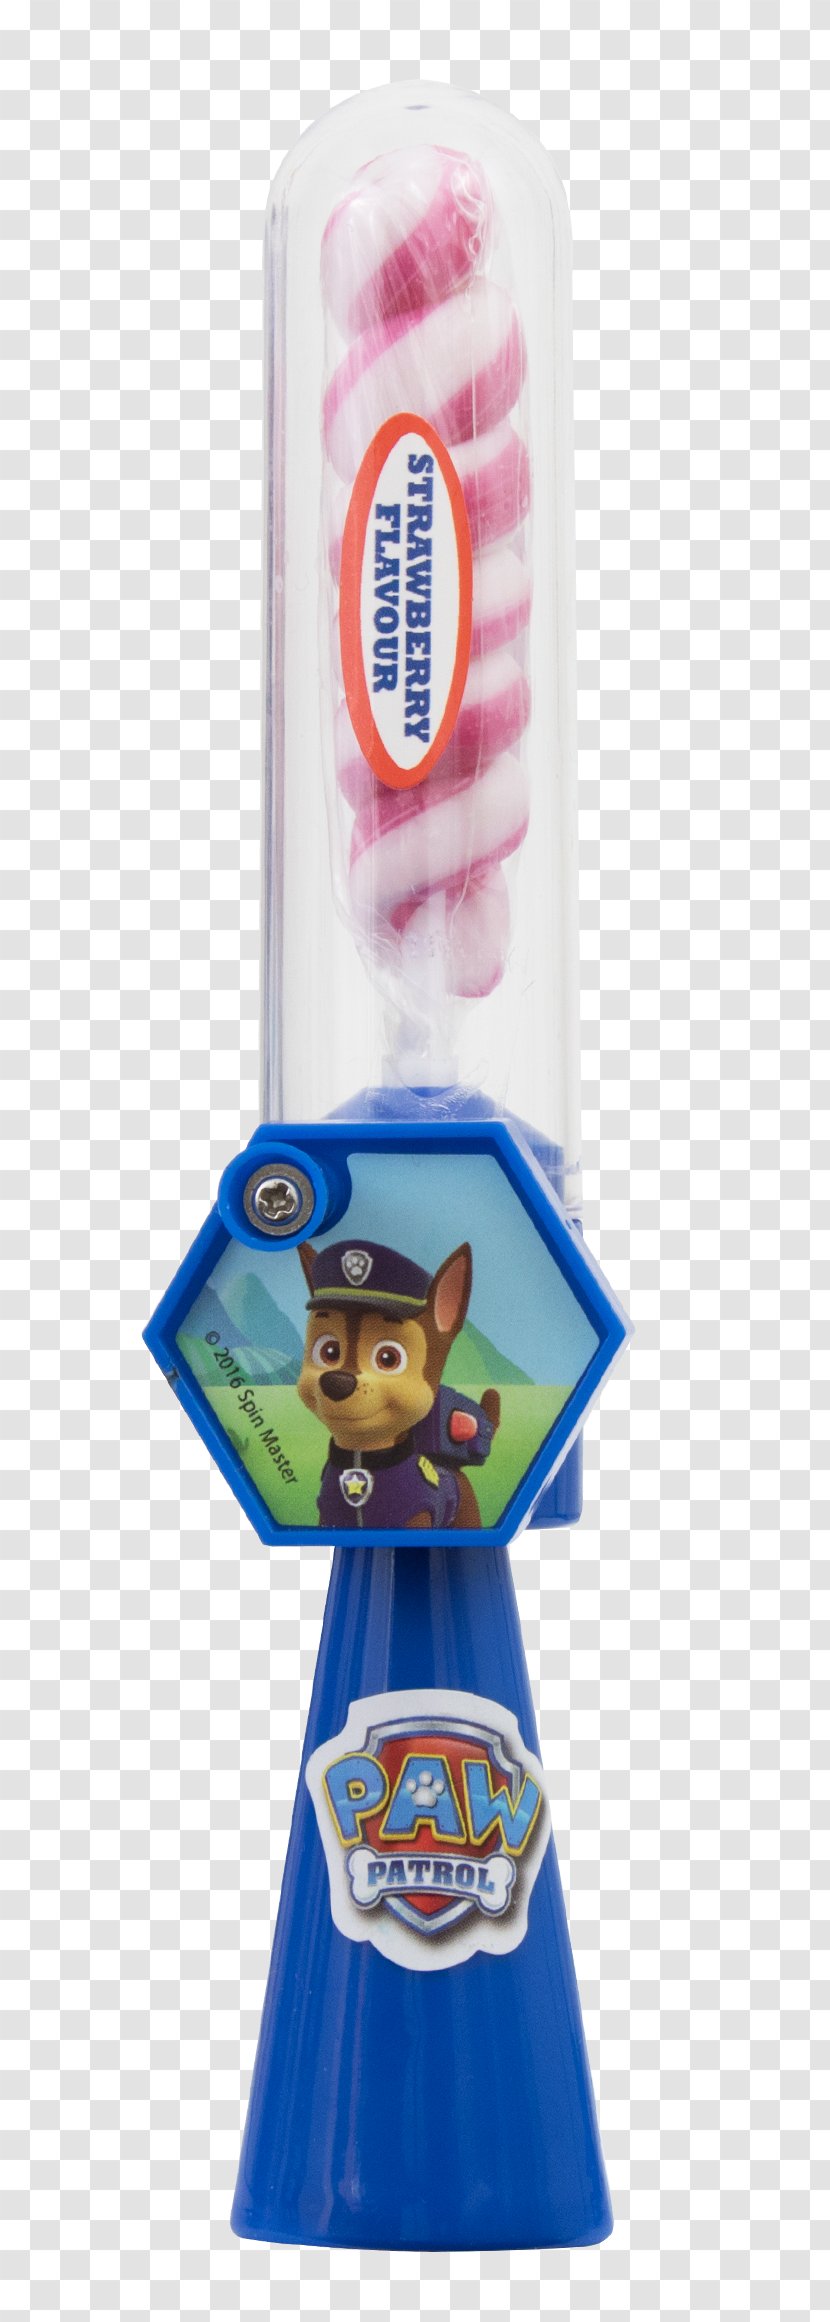 Lollipop Confectionery Paw Patrol Pop Ups Candy - Bip Holland Bv - Small Fruit Transparent PNG